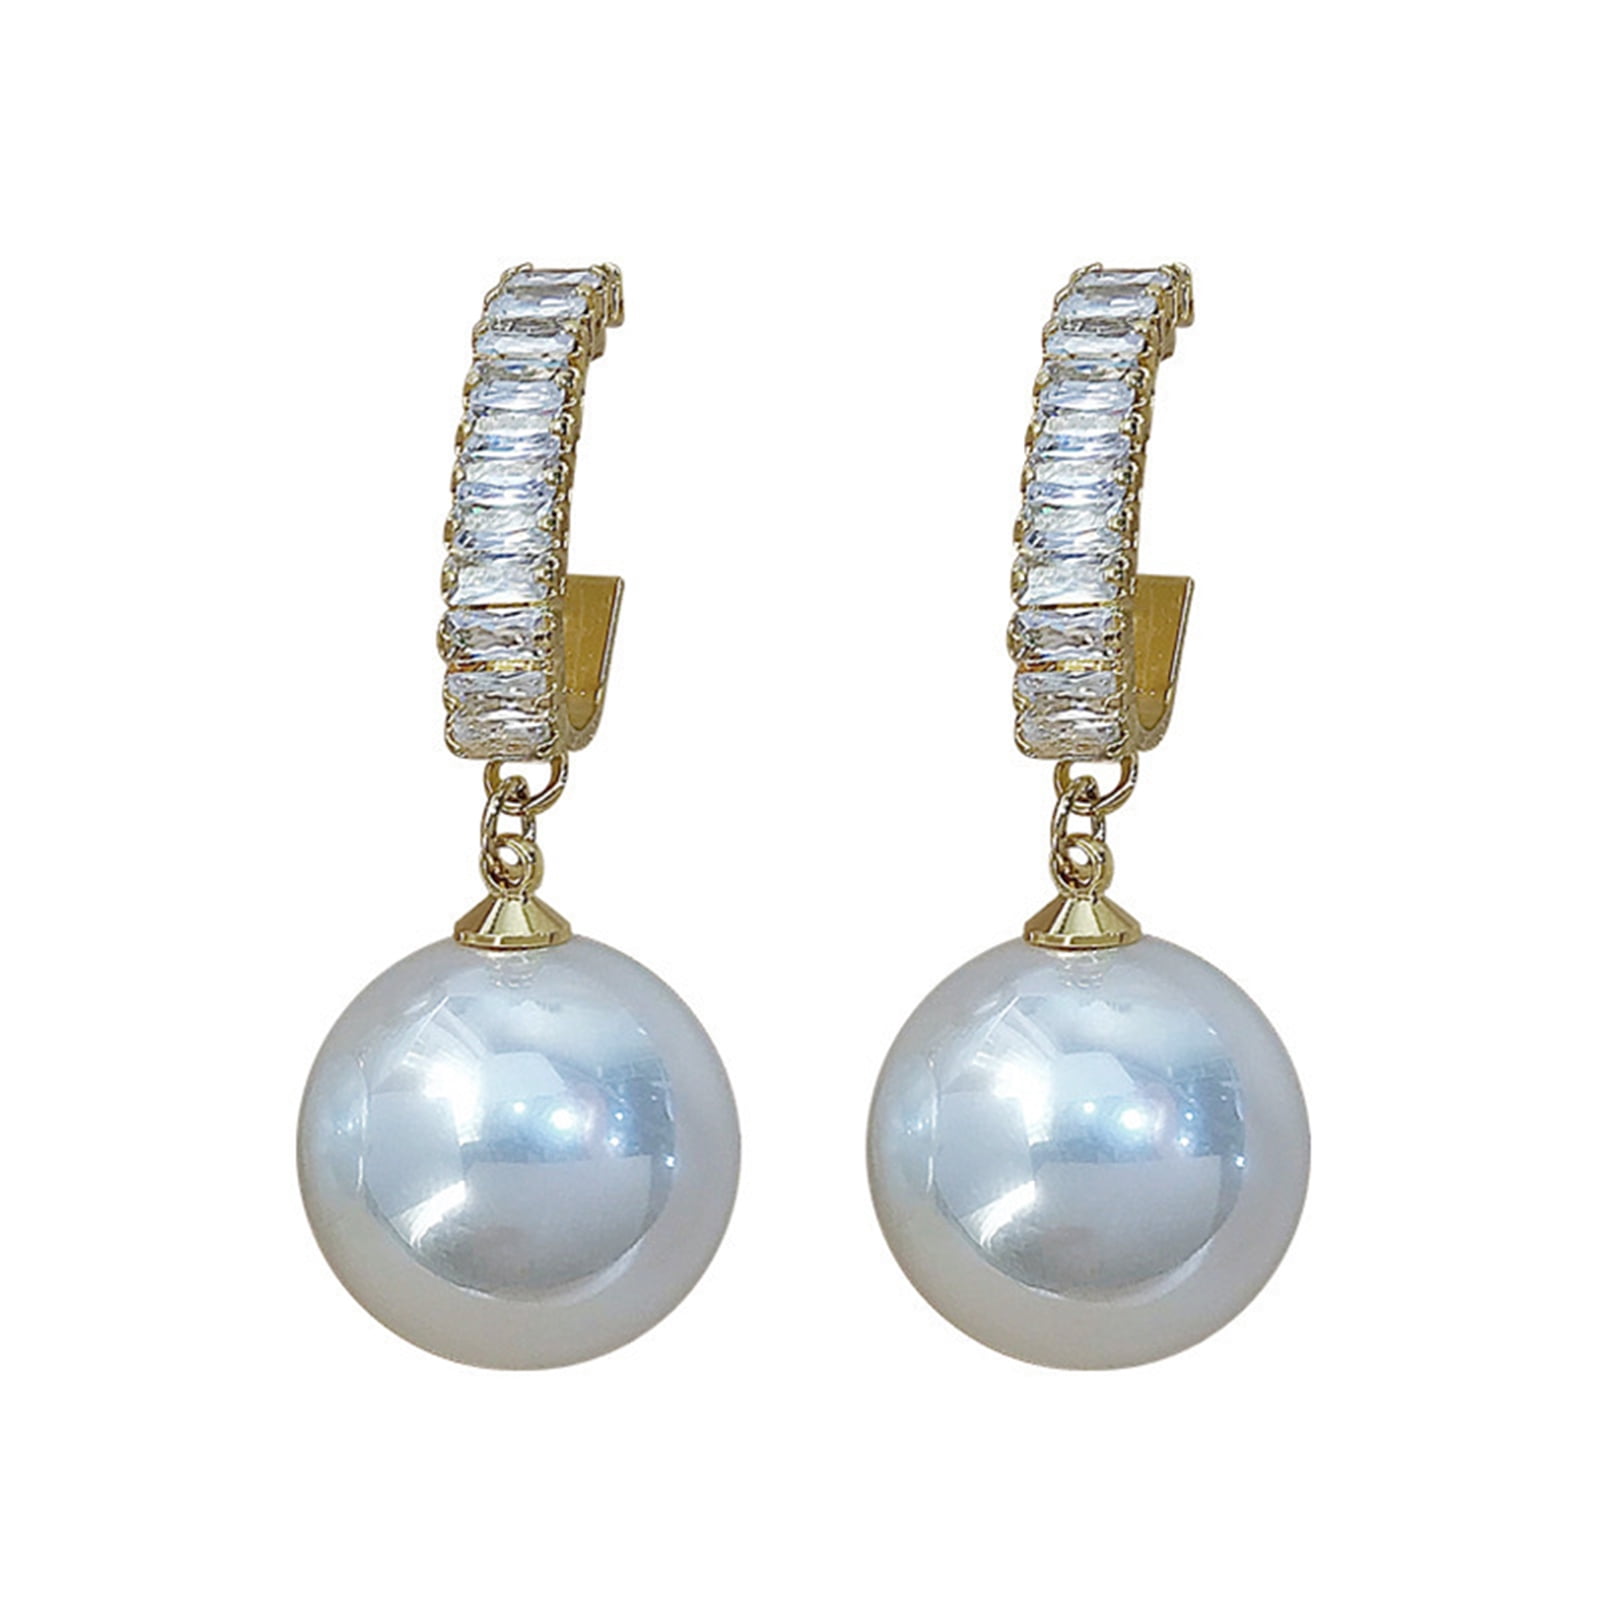 Details about   14-15mm White Flat Baroque Pearl Earring 18k Hook Natural Flawless Women